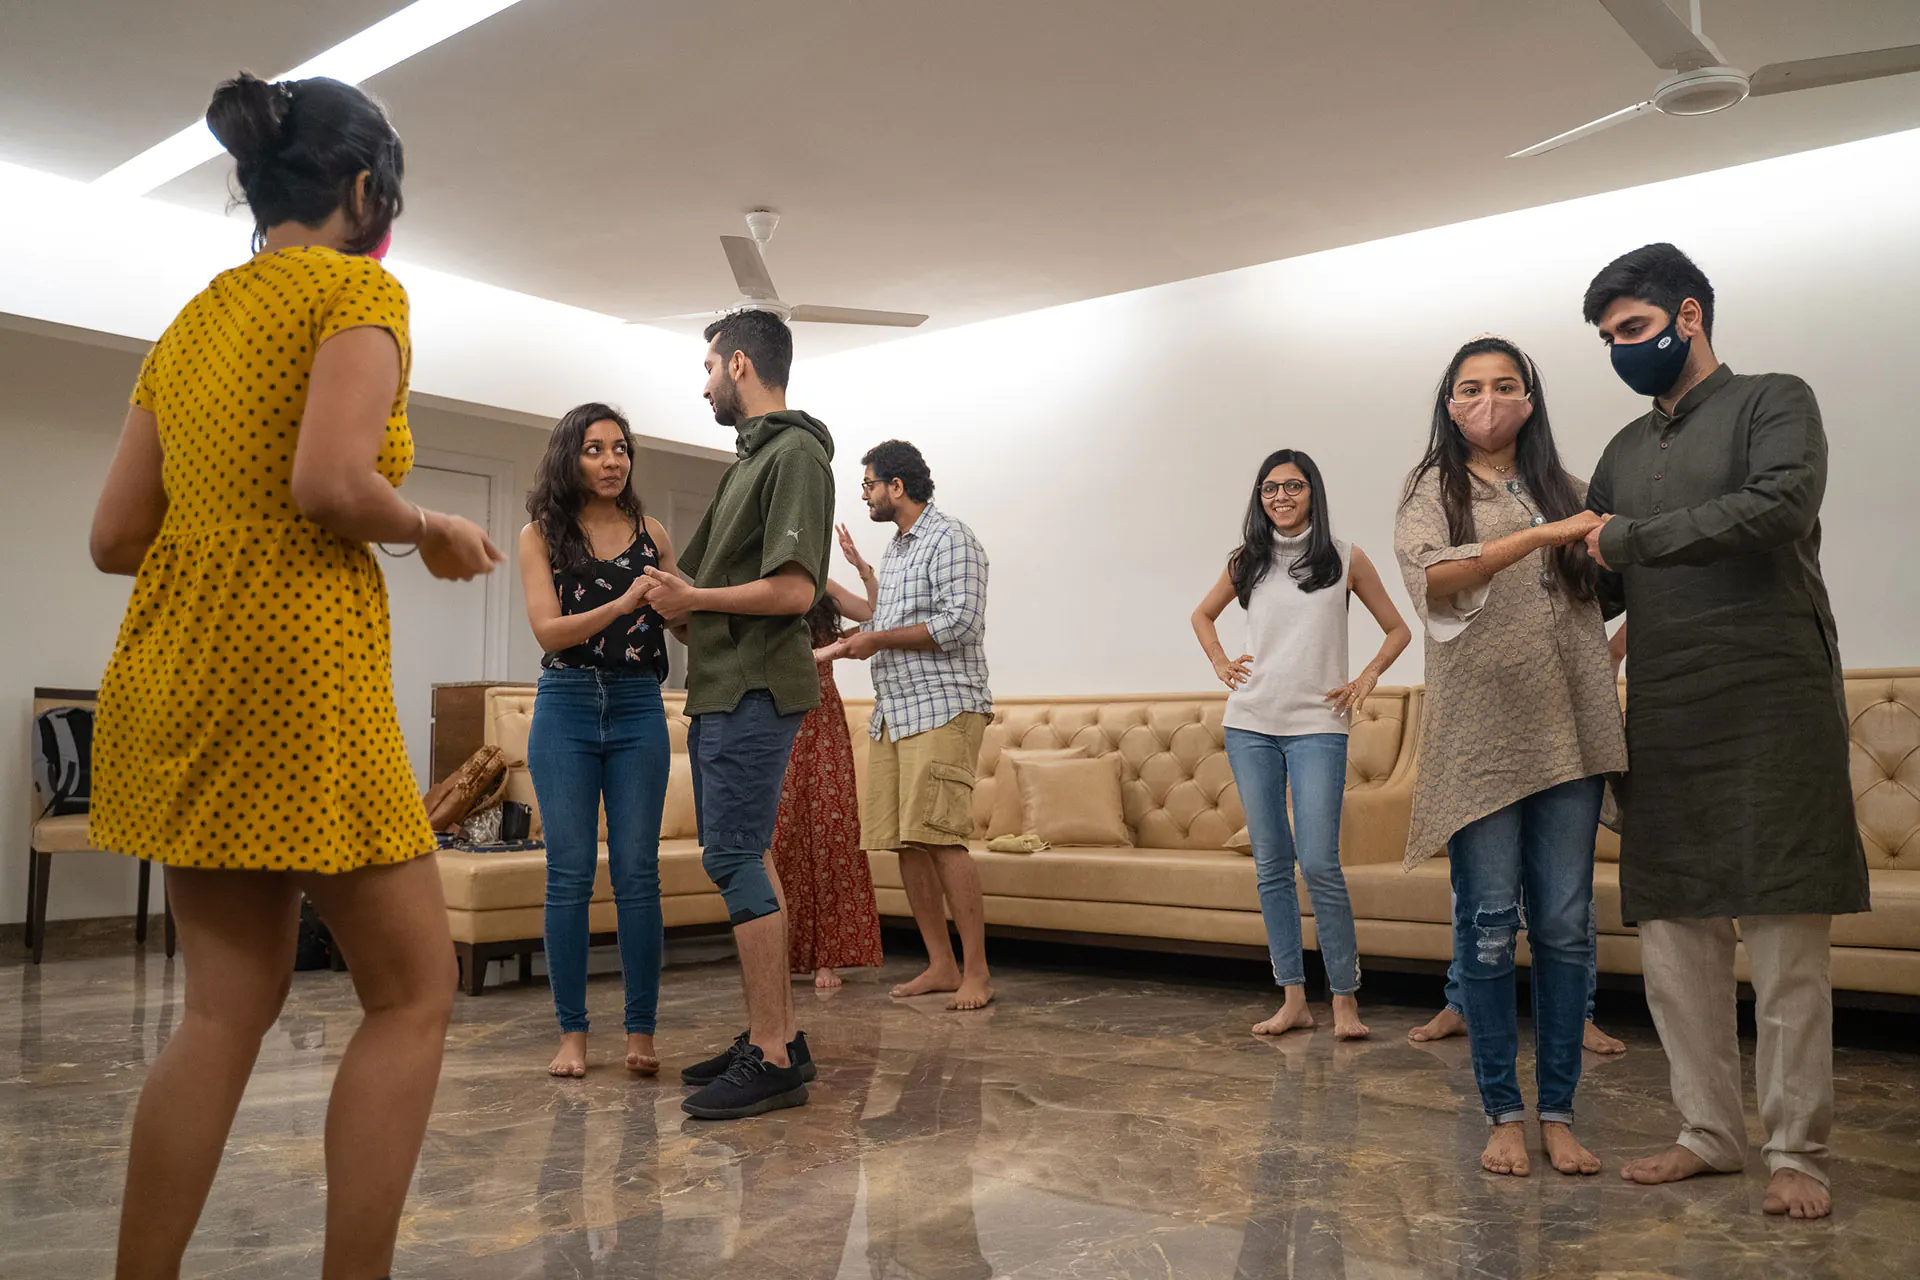 A fun Lindy Hop workshop at a house party in India